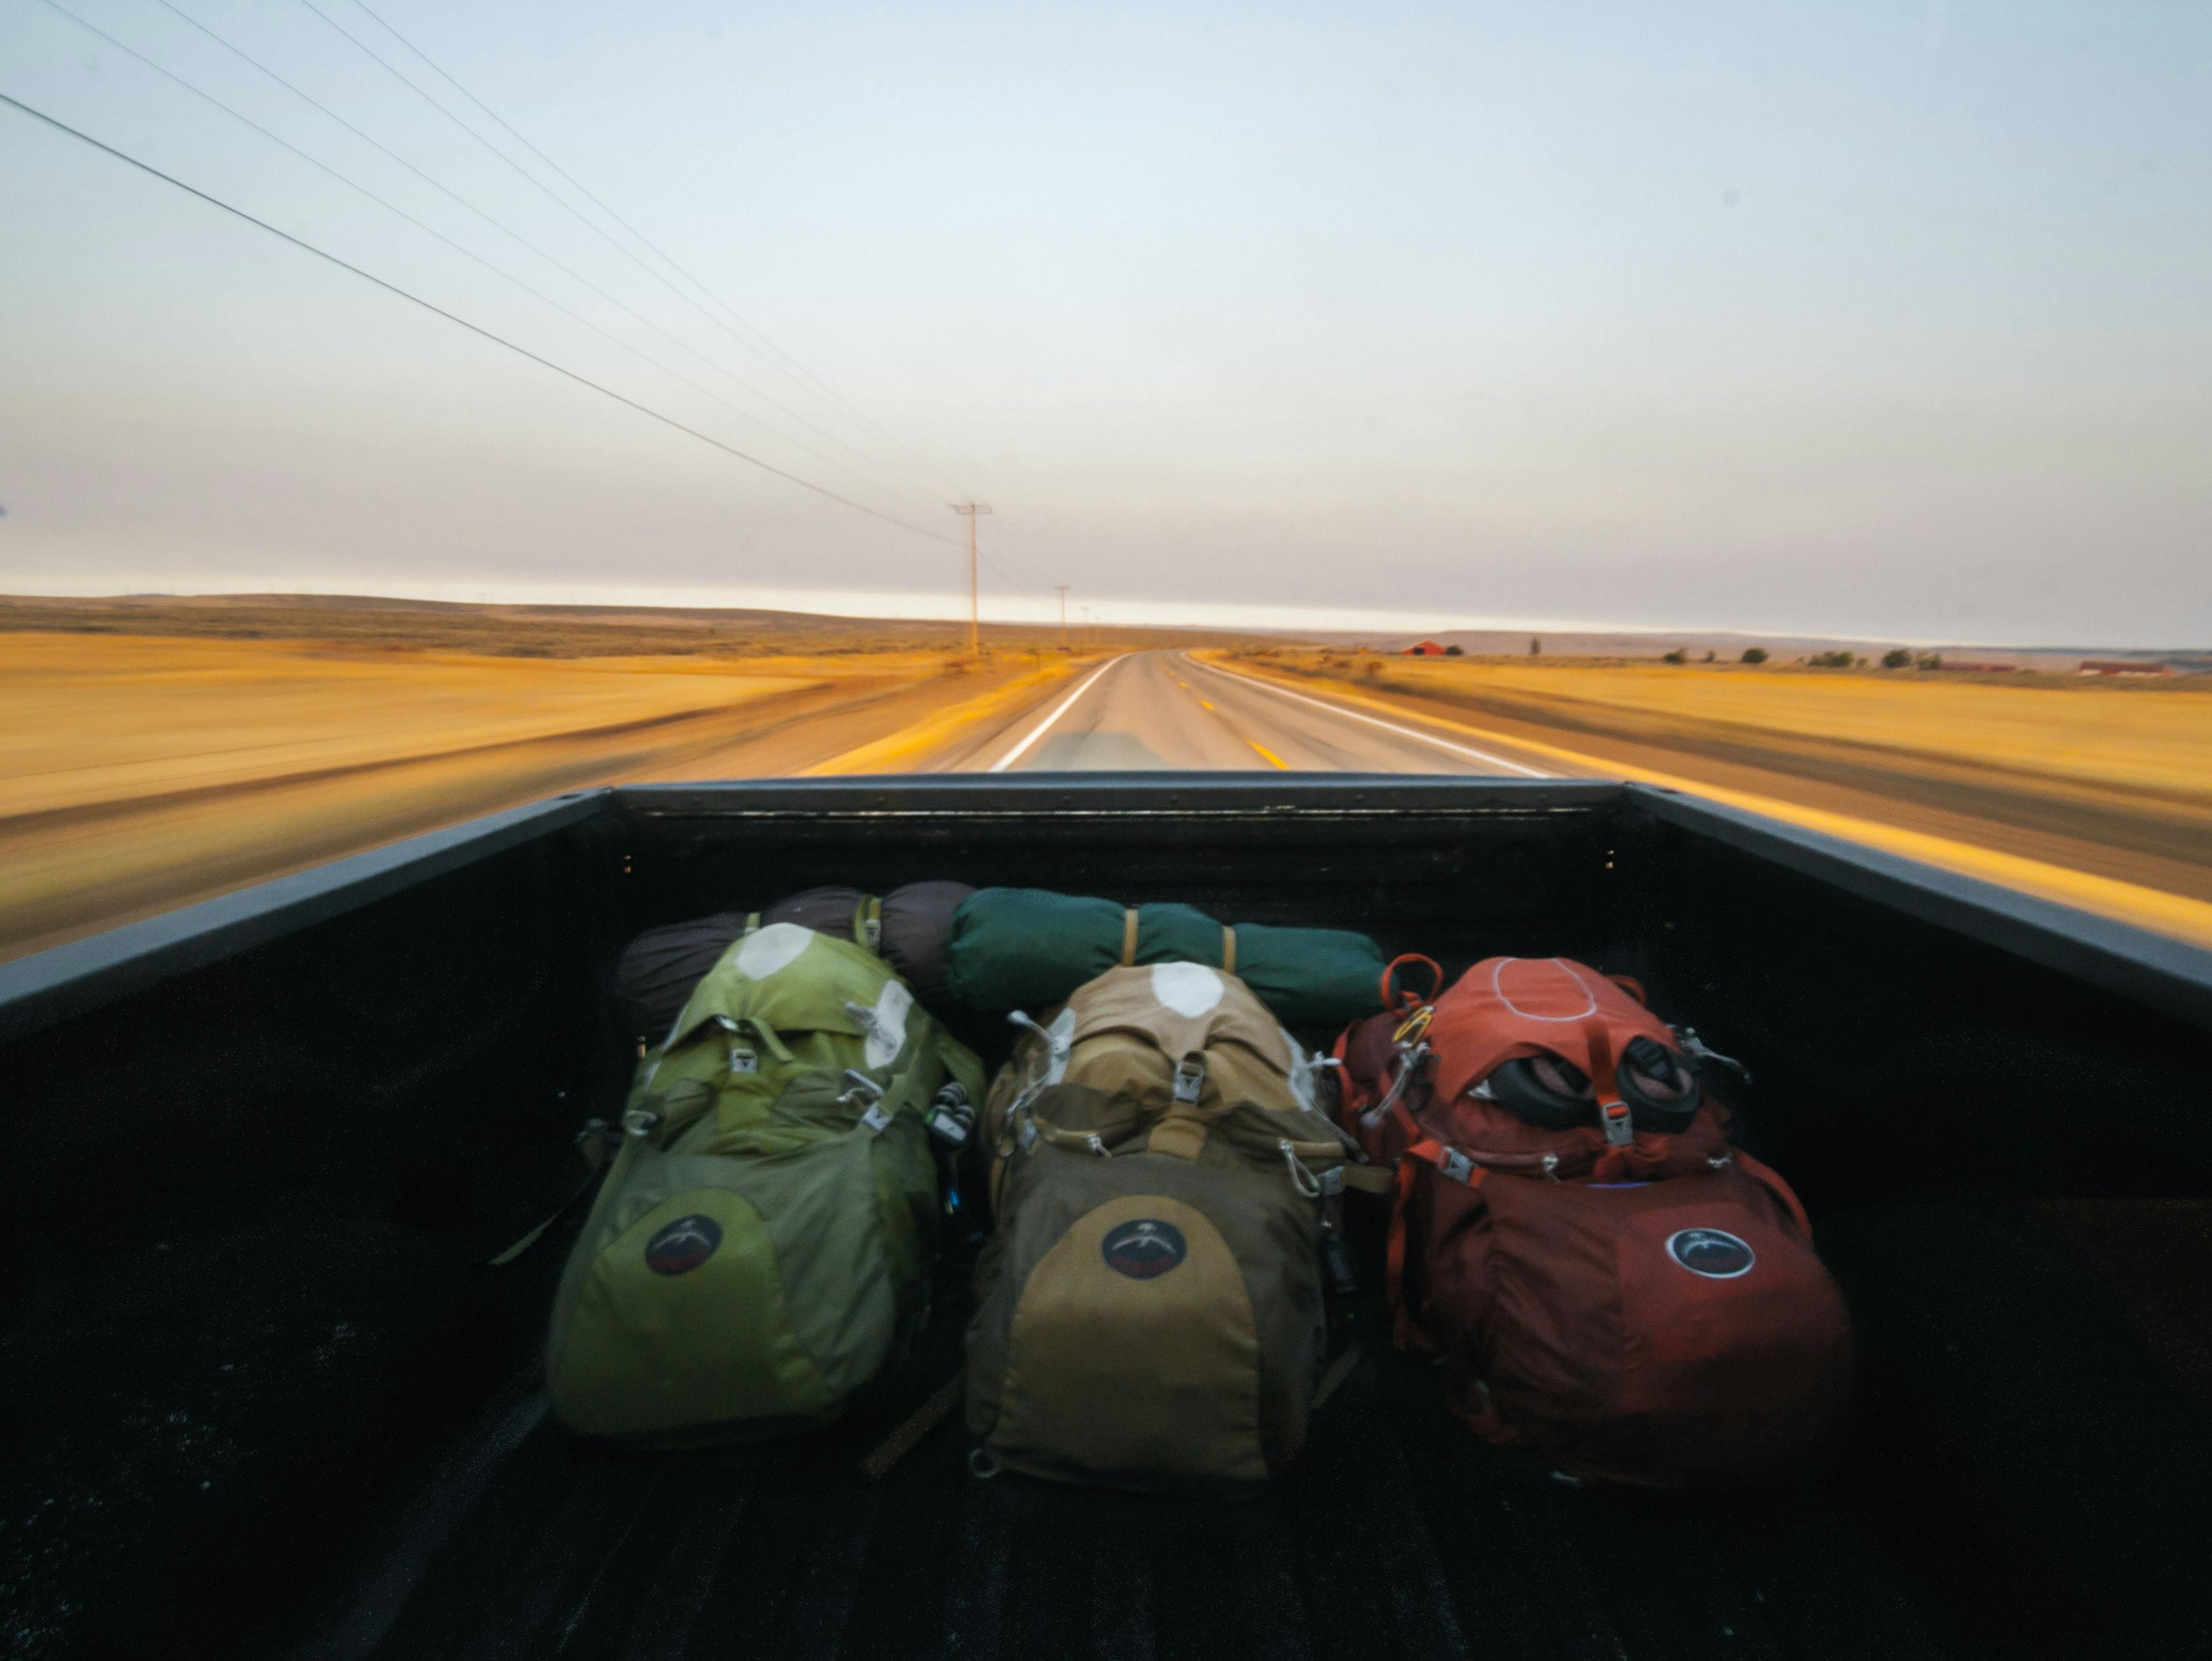 Three backpacks and sleeping pads in the back of a pickup truck